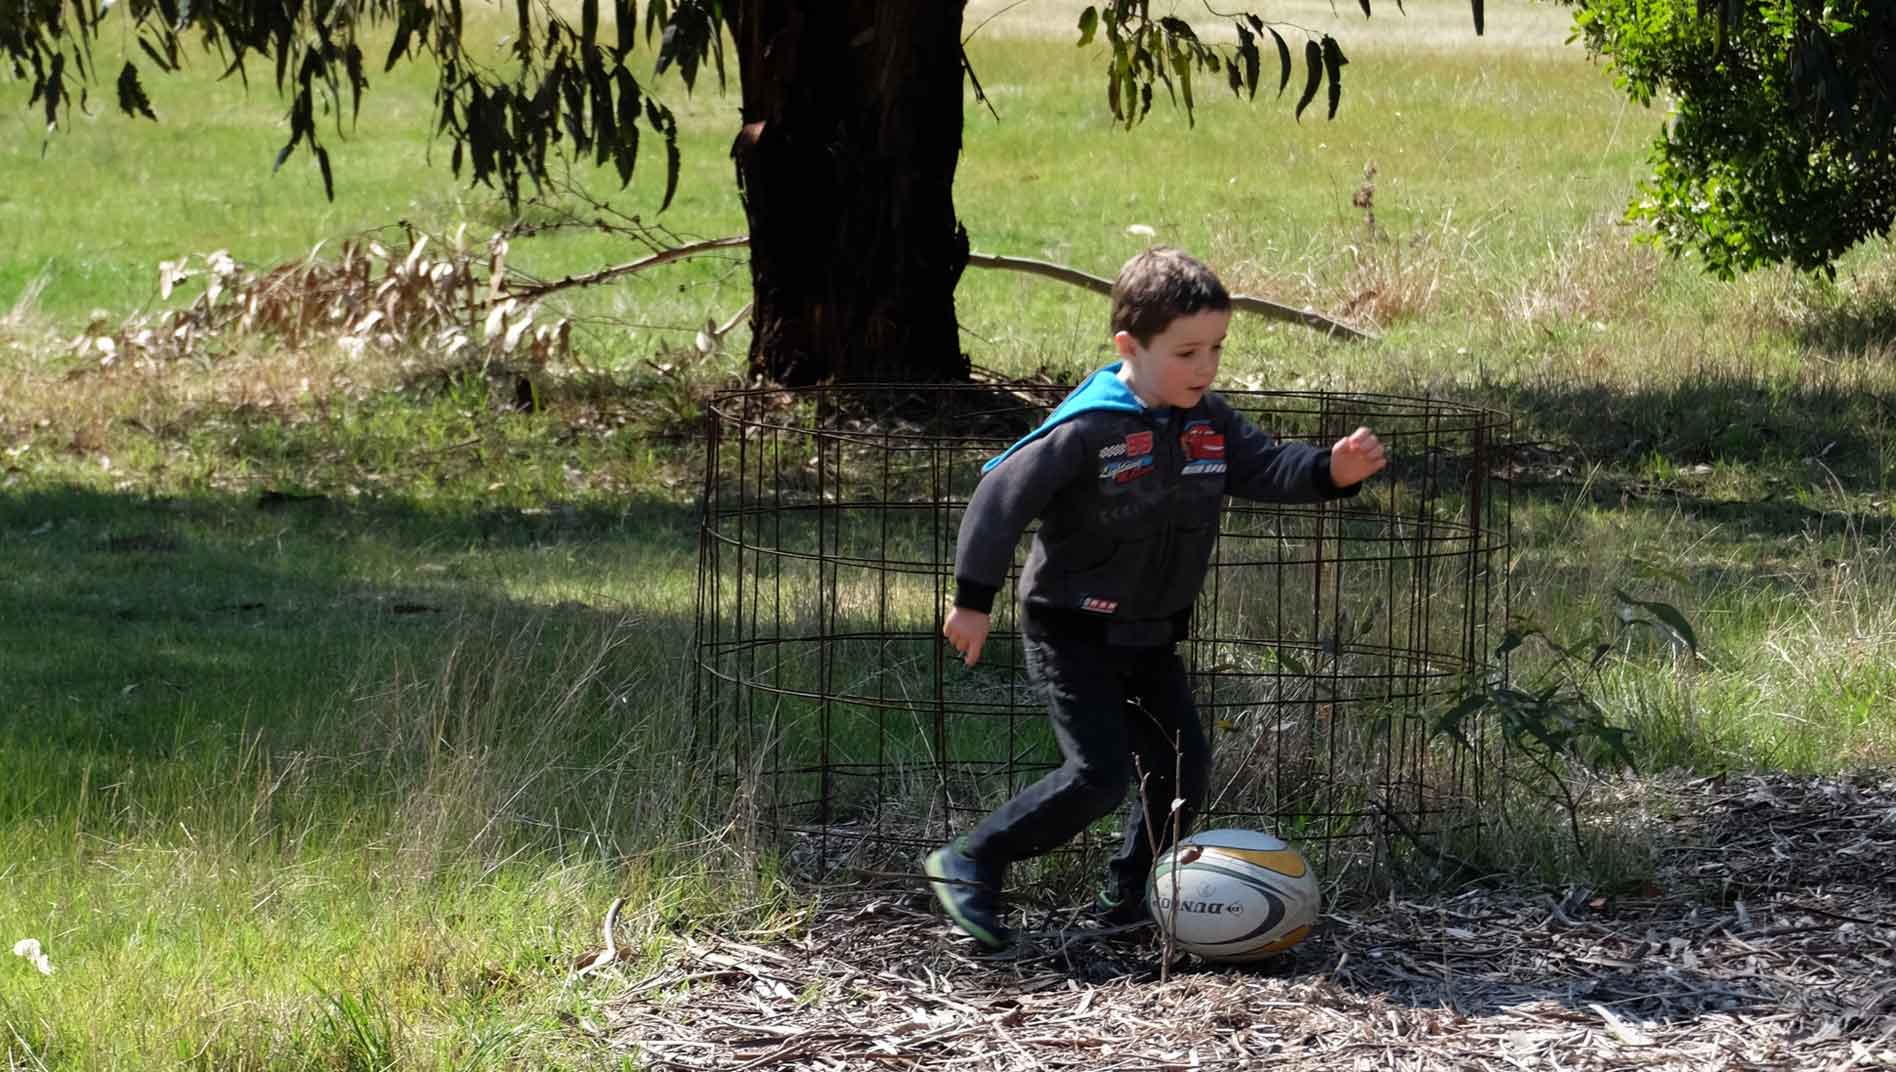 A young boy in a wetsuit playing with a rugby ball near a tree and wire fencing in a grassy field.